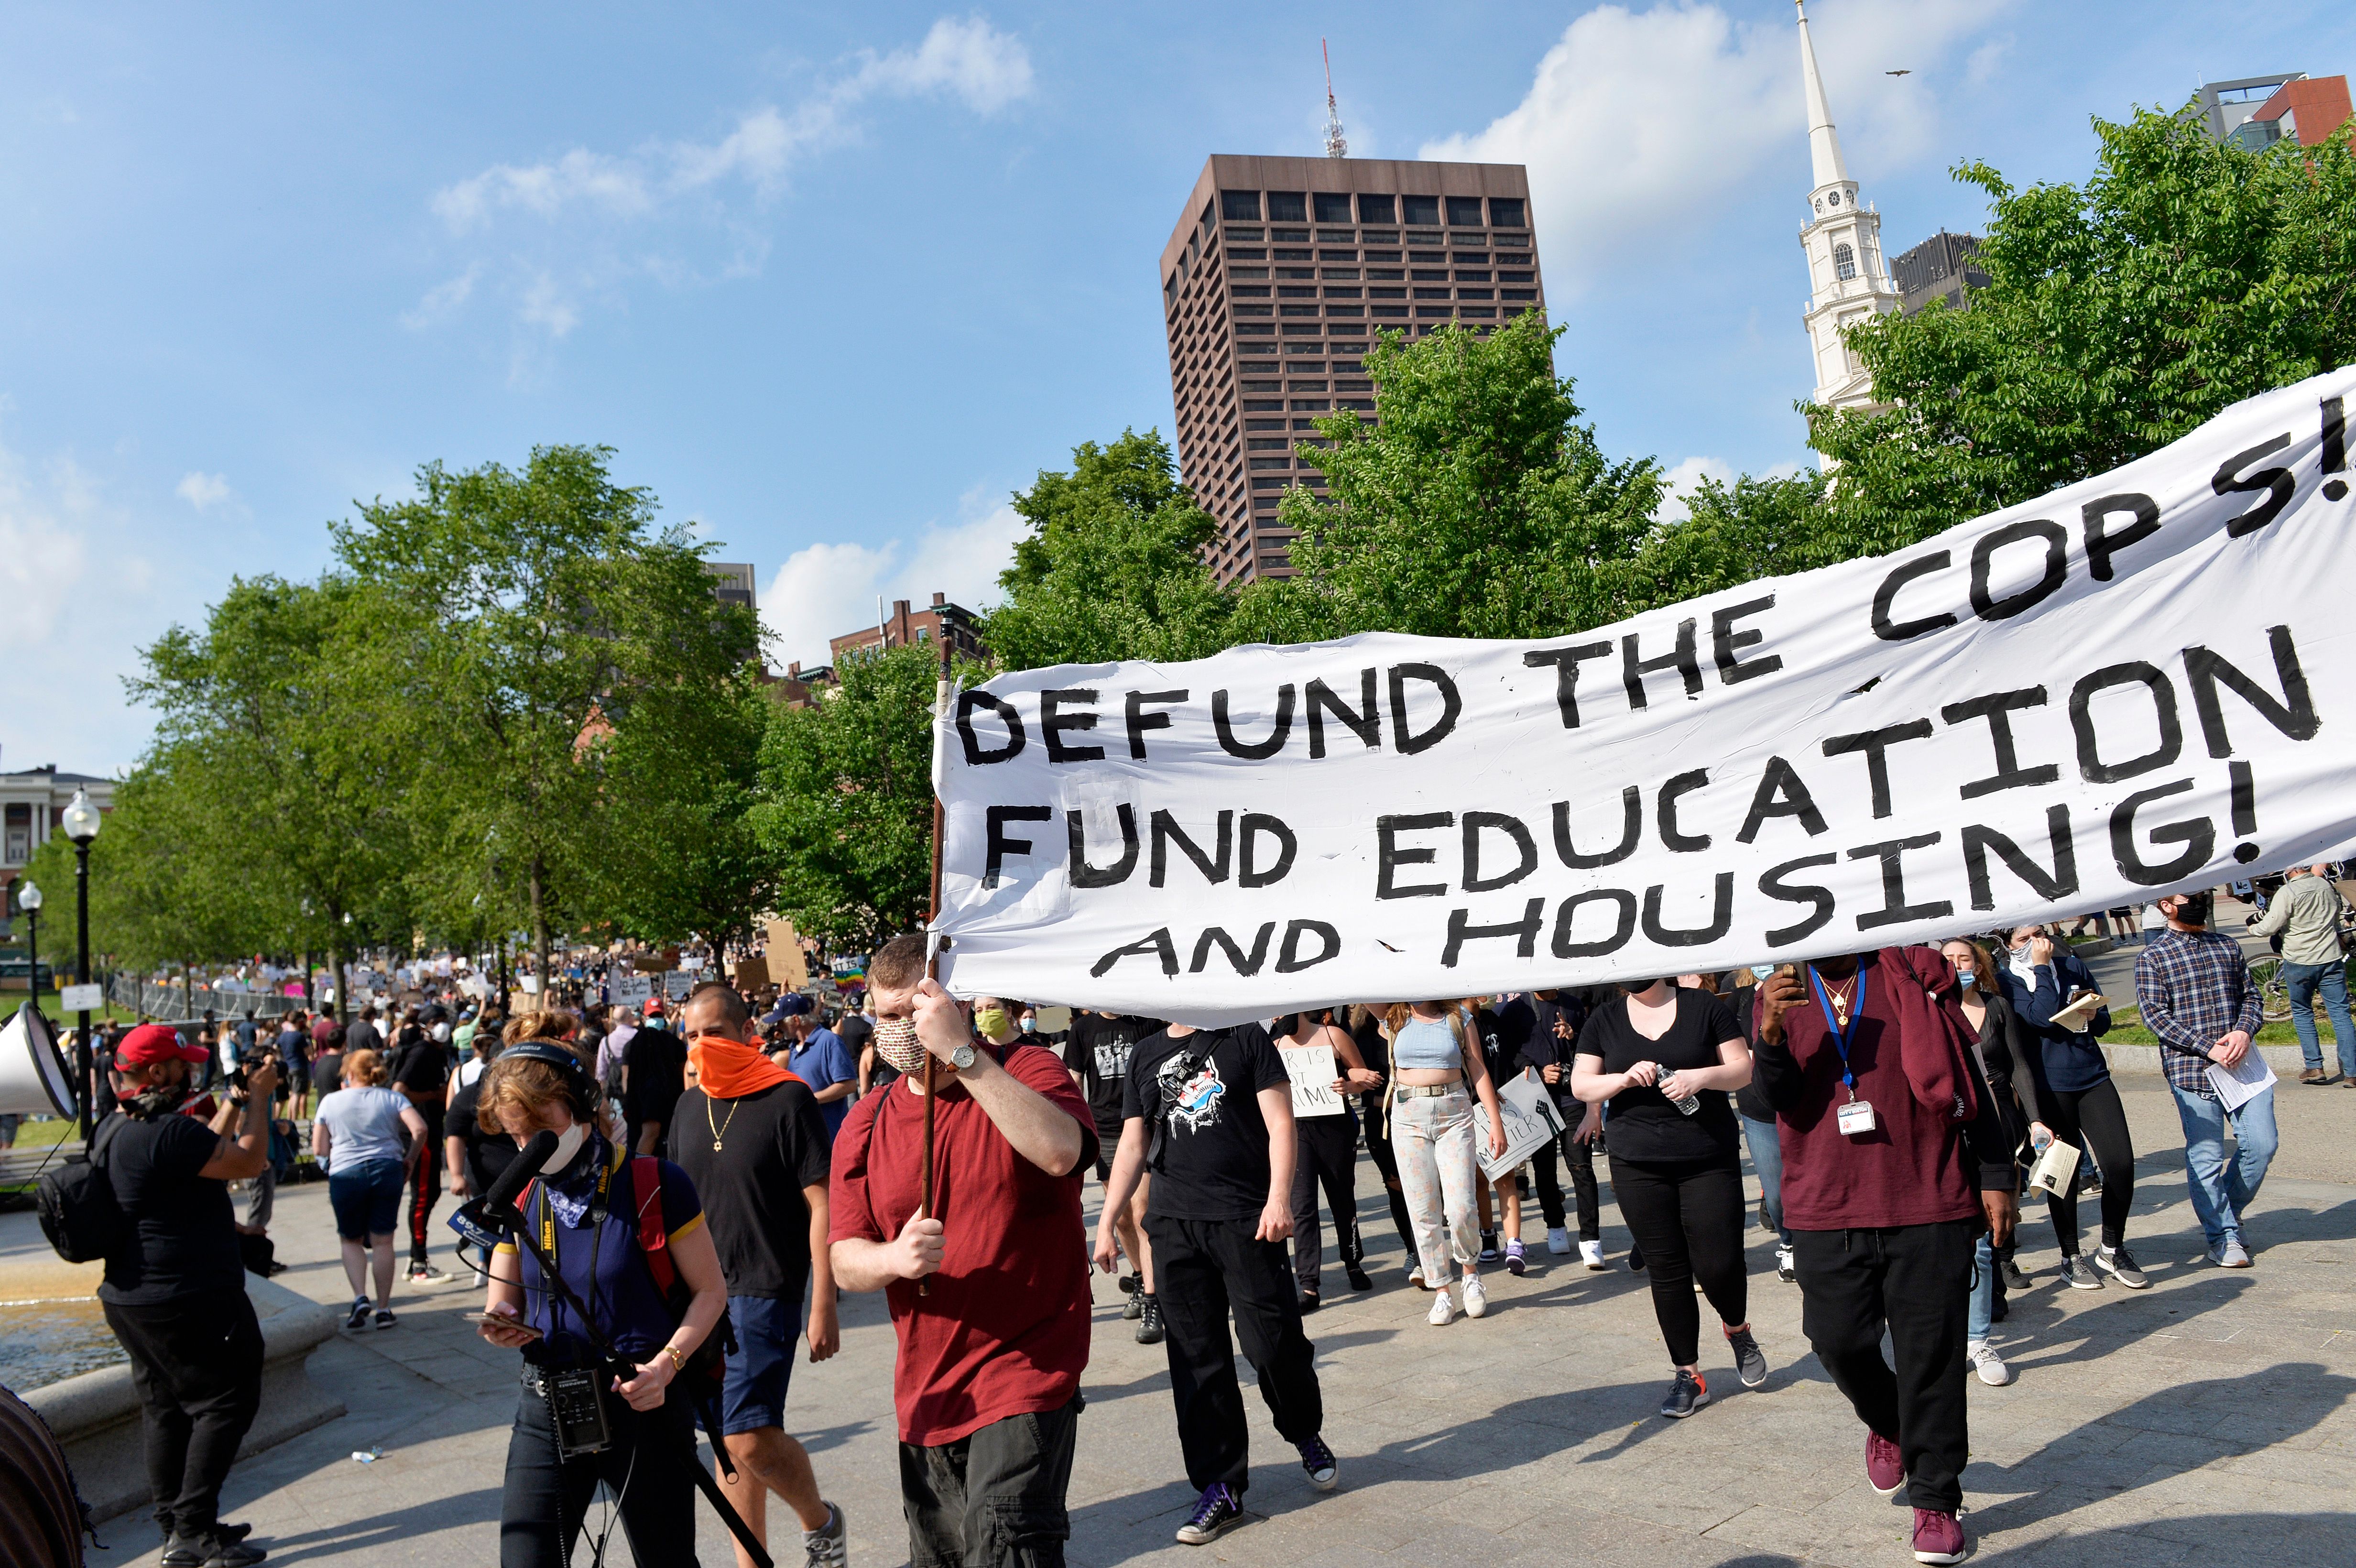 People hold up placards and their arms as they march during a "Black Lives Matter" rally, in response to the death of George Floyd and other victims of Police Racism across the US, at Boston Common, in Boston, Massachusetts on June 3, 2020. - Anti-racism protests have put several US cities under curfew to suppress rioting, following the death of George Floyd while in police custody. (Photo by Joseph Prezioso / AFP) (Photo by JOSEPH PREZIOSO/AFP via Getty Images)